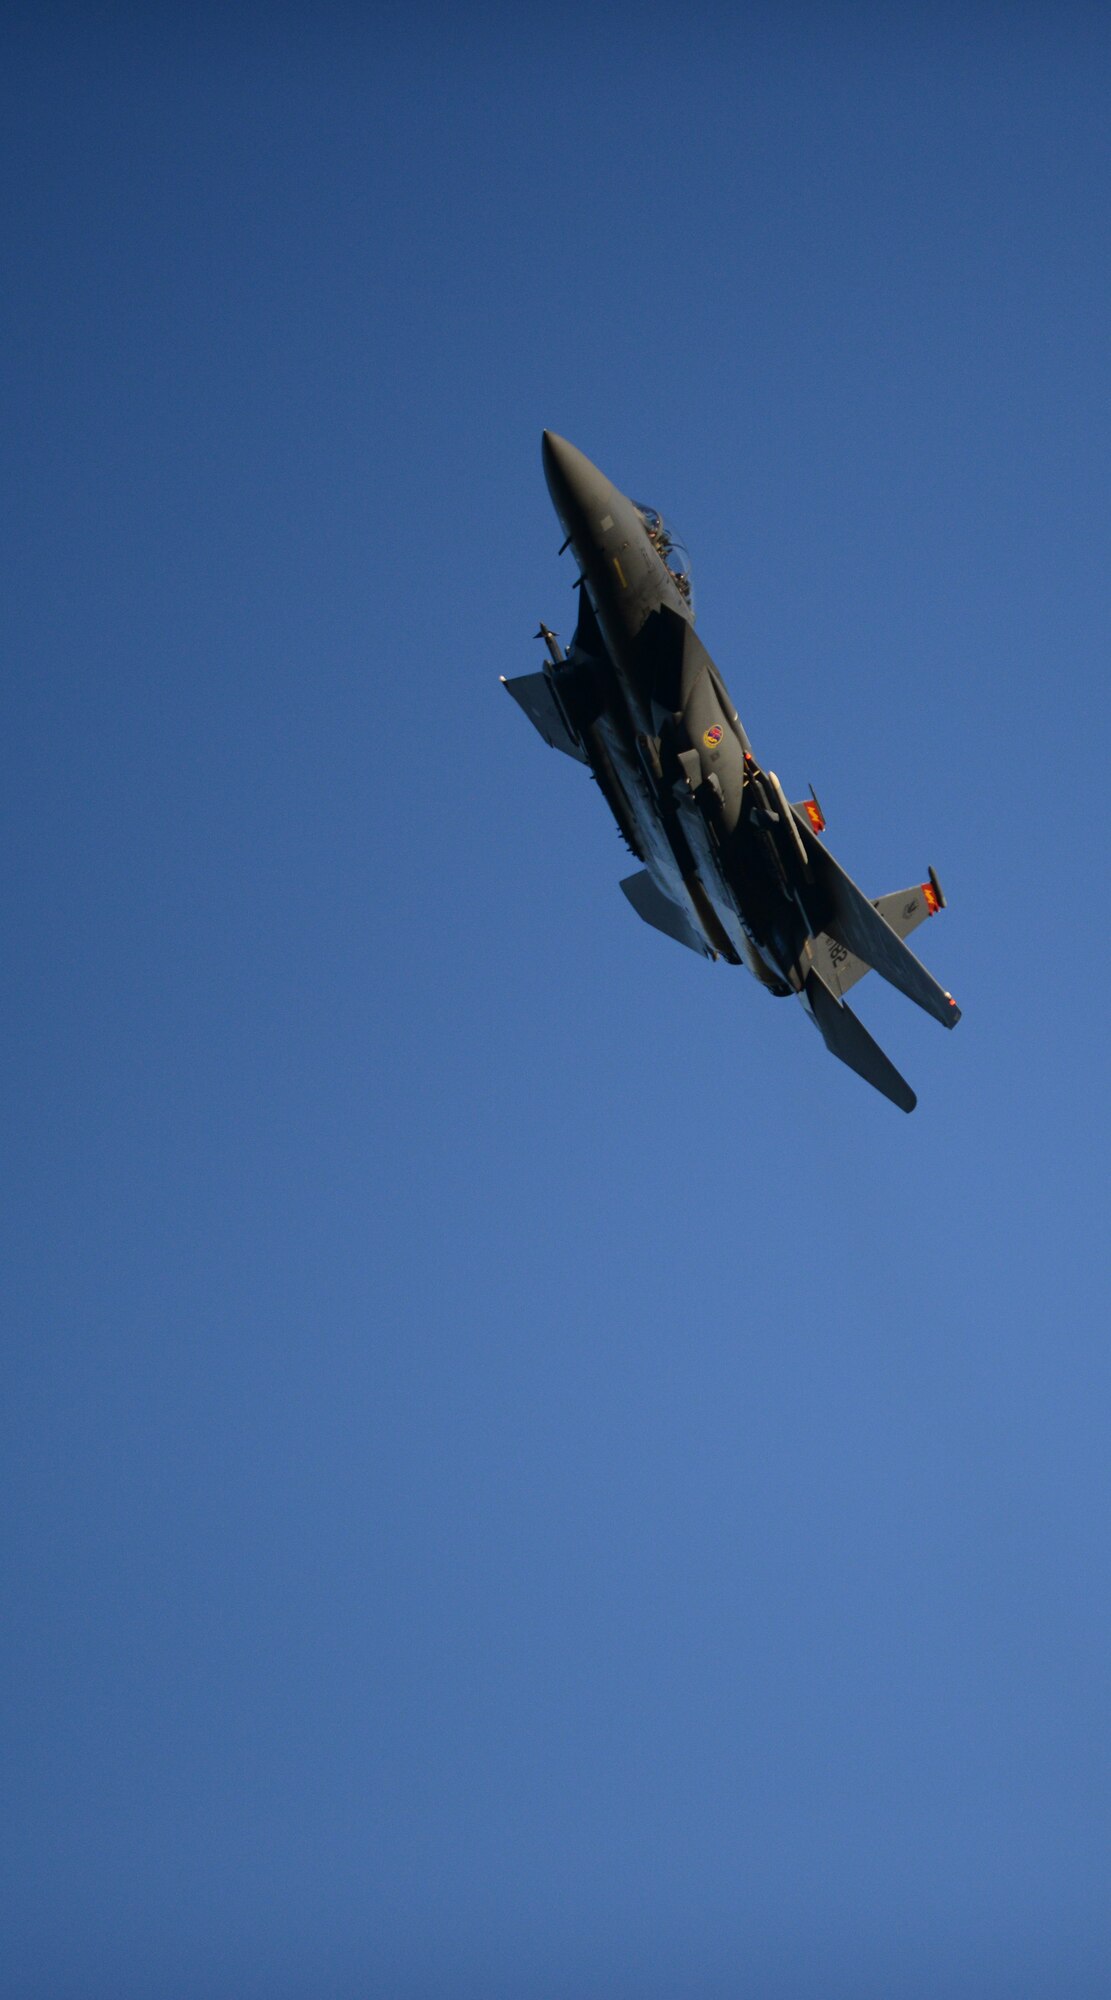 An F-15E Strike Eagle passes by after a simulated air strike during Gunfighter Flag at Saylor Creek bombing range near Mountain Home Air Force Base, Idaho, March 11, 2014. Mountain Home AFB has one of the top range complexes in the United States. (U.S. Air Force photo by Airman 1st Class Malissa Lott/RELEASED)